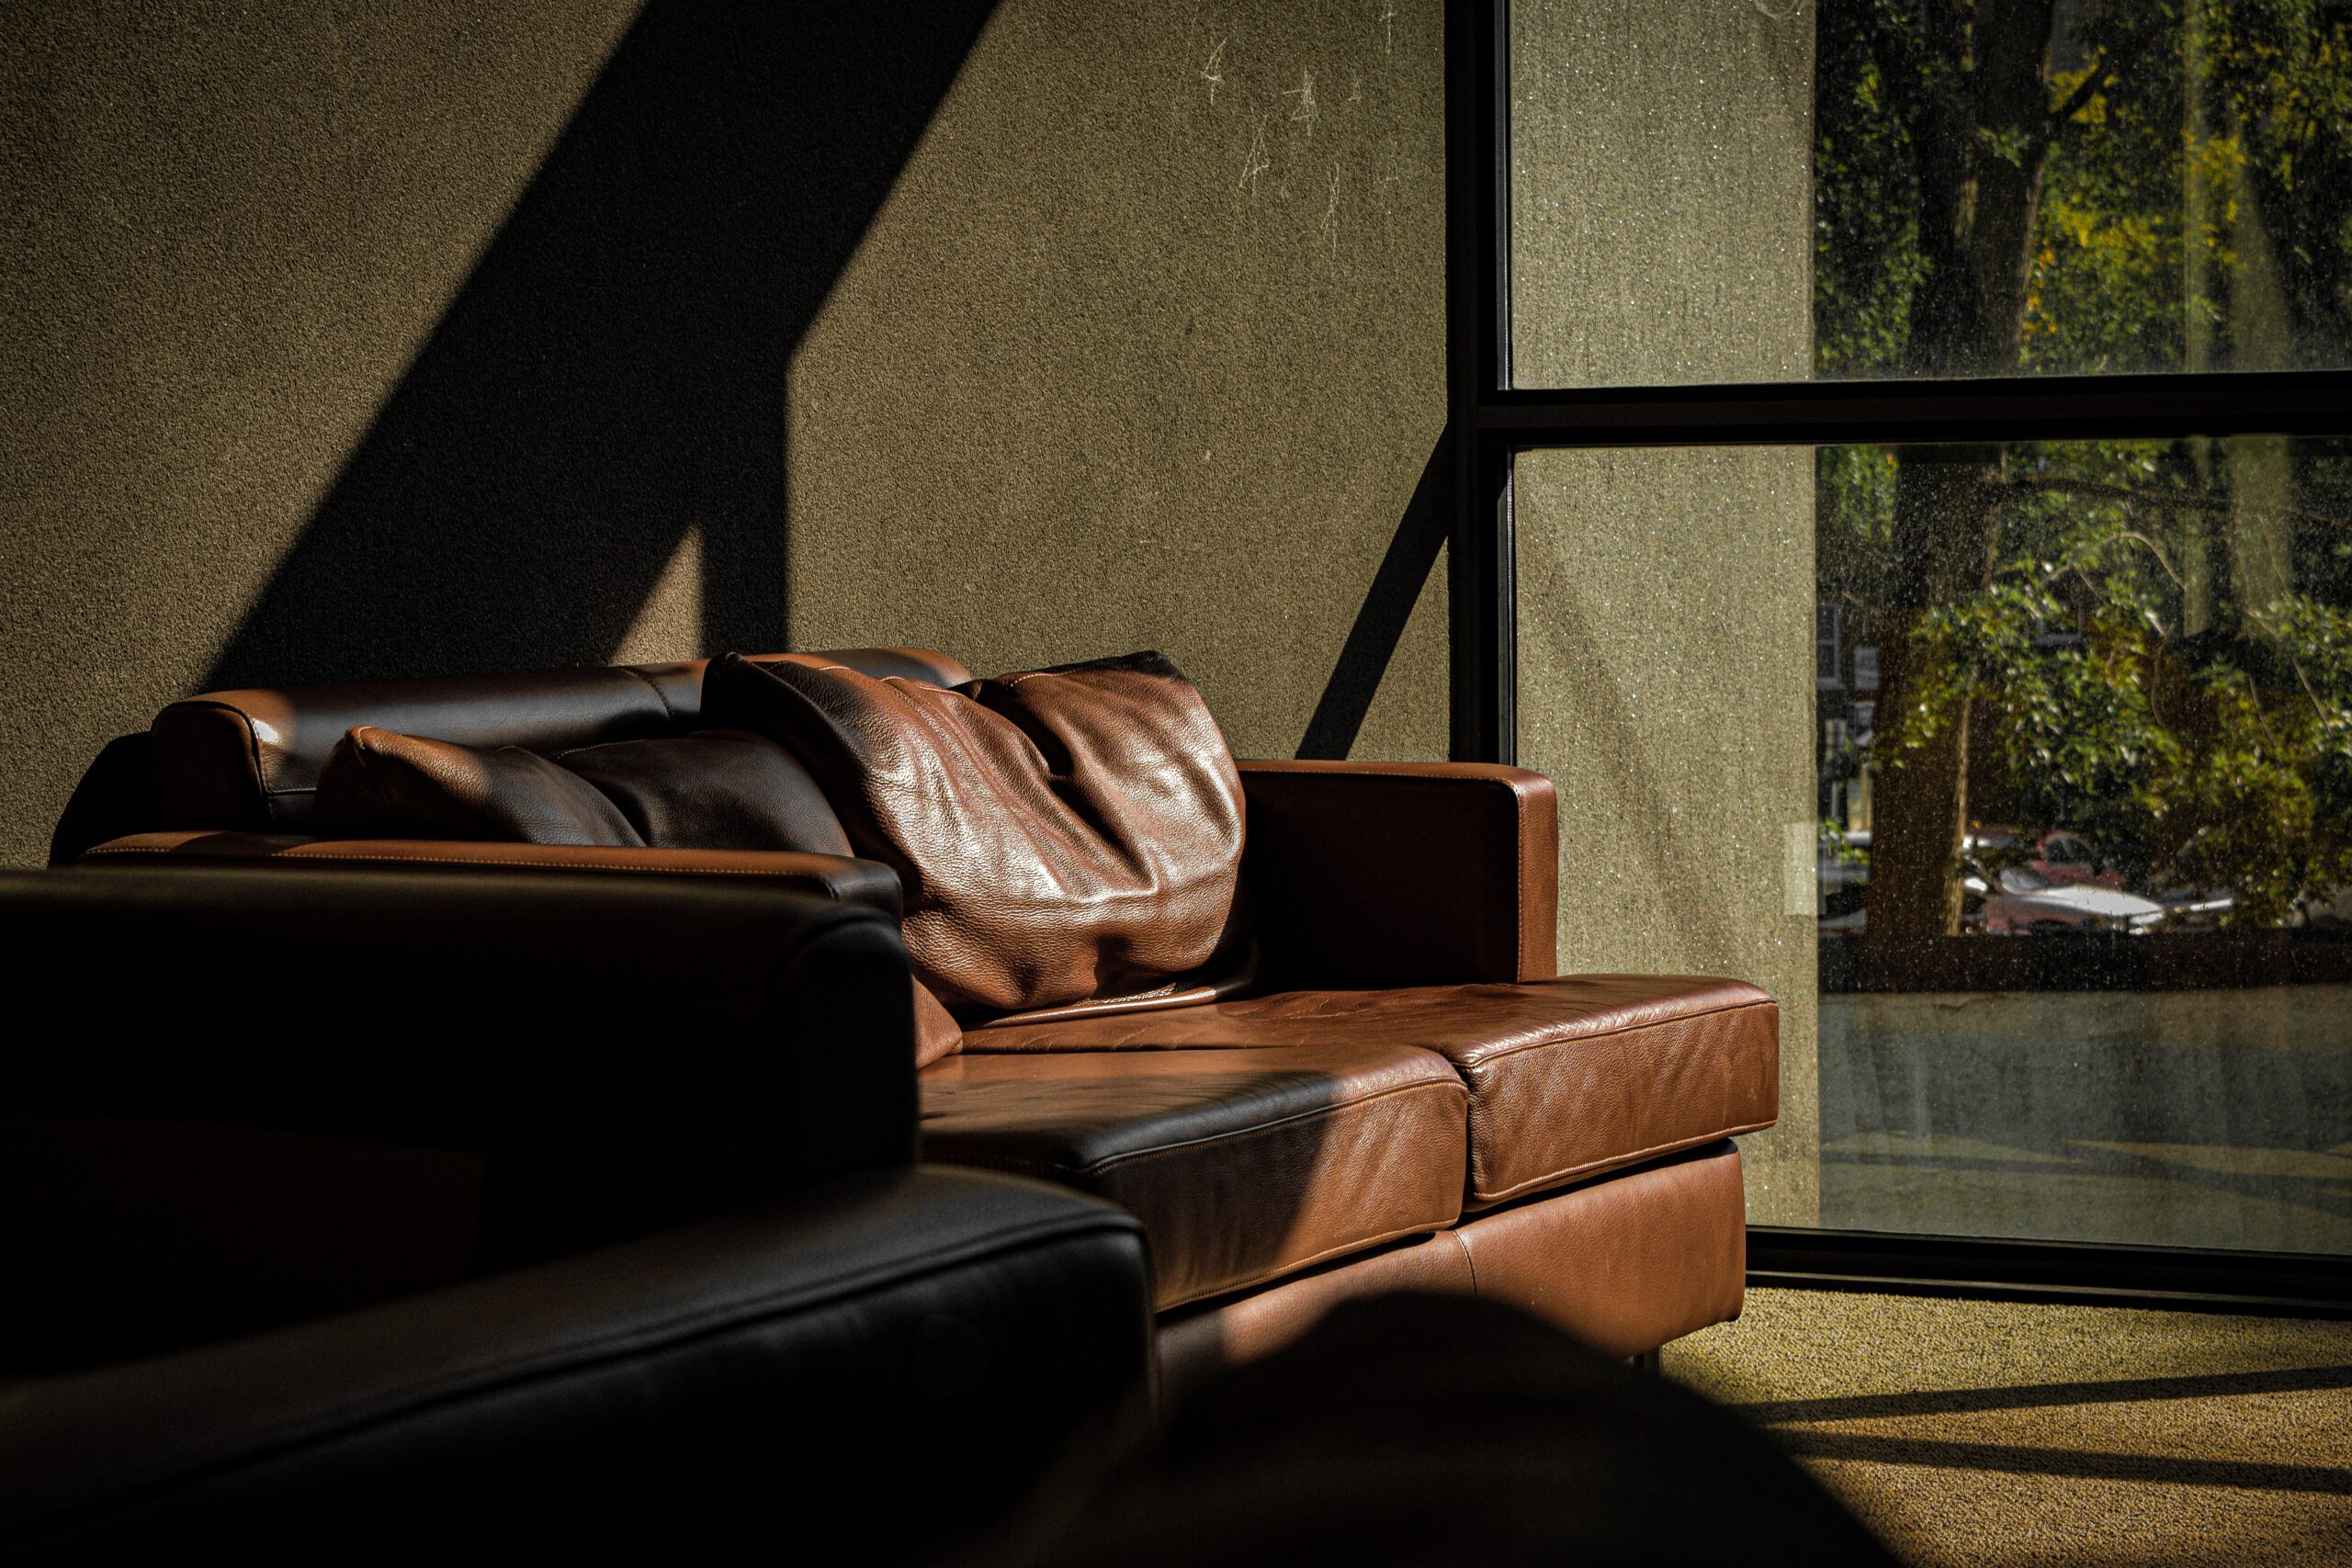 Brown leather couch half in the sun, half in shadow